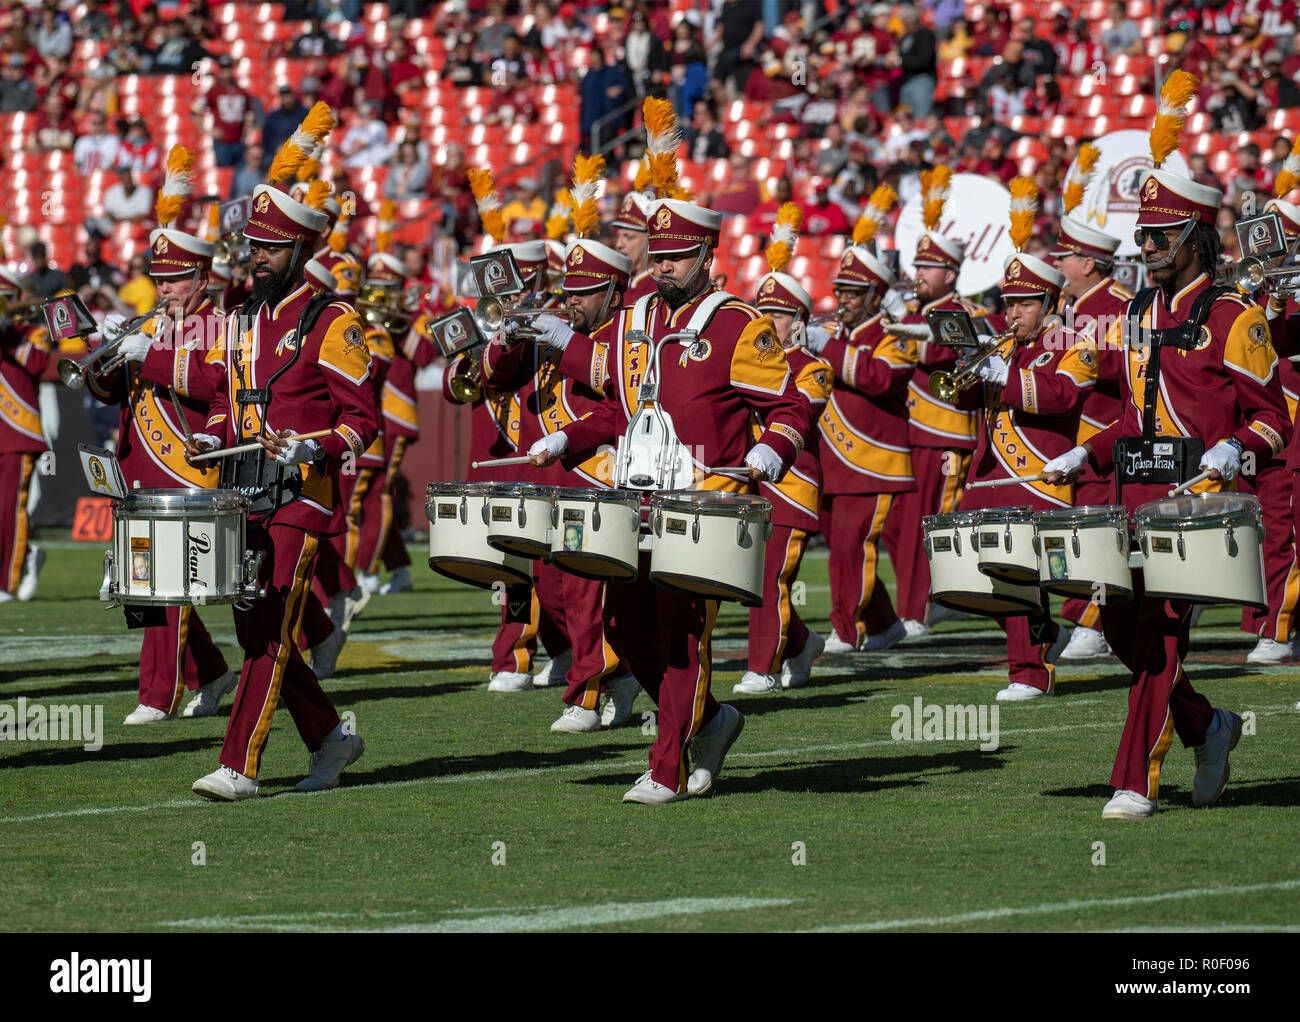 Maryland, USA. 4th Nov 2018. Washington Redskins Marching Band performs prior to the game against the Atlanta Falcons at FedEx Field in Landover, Maryland on Sunday, November 4, 2018. Credit: Ron Sachs/CNP | usage worldwide Credit: dpa picture alliance/Alamy Live News Stock Photo